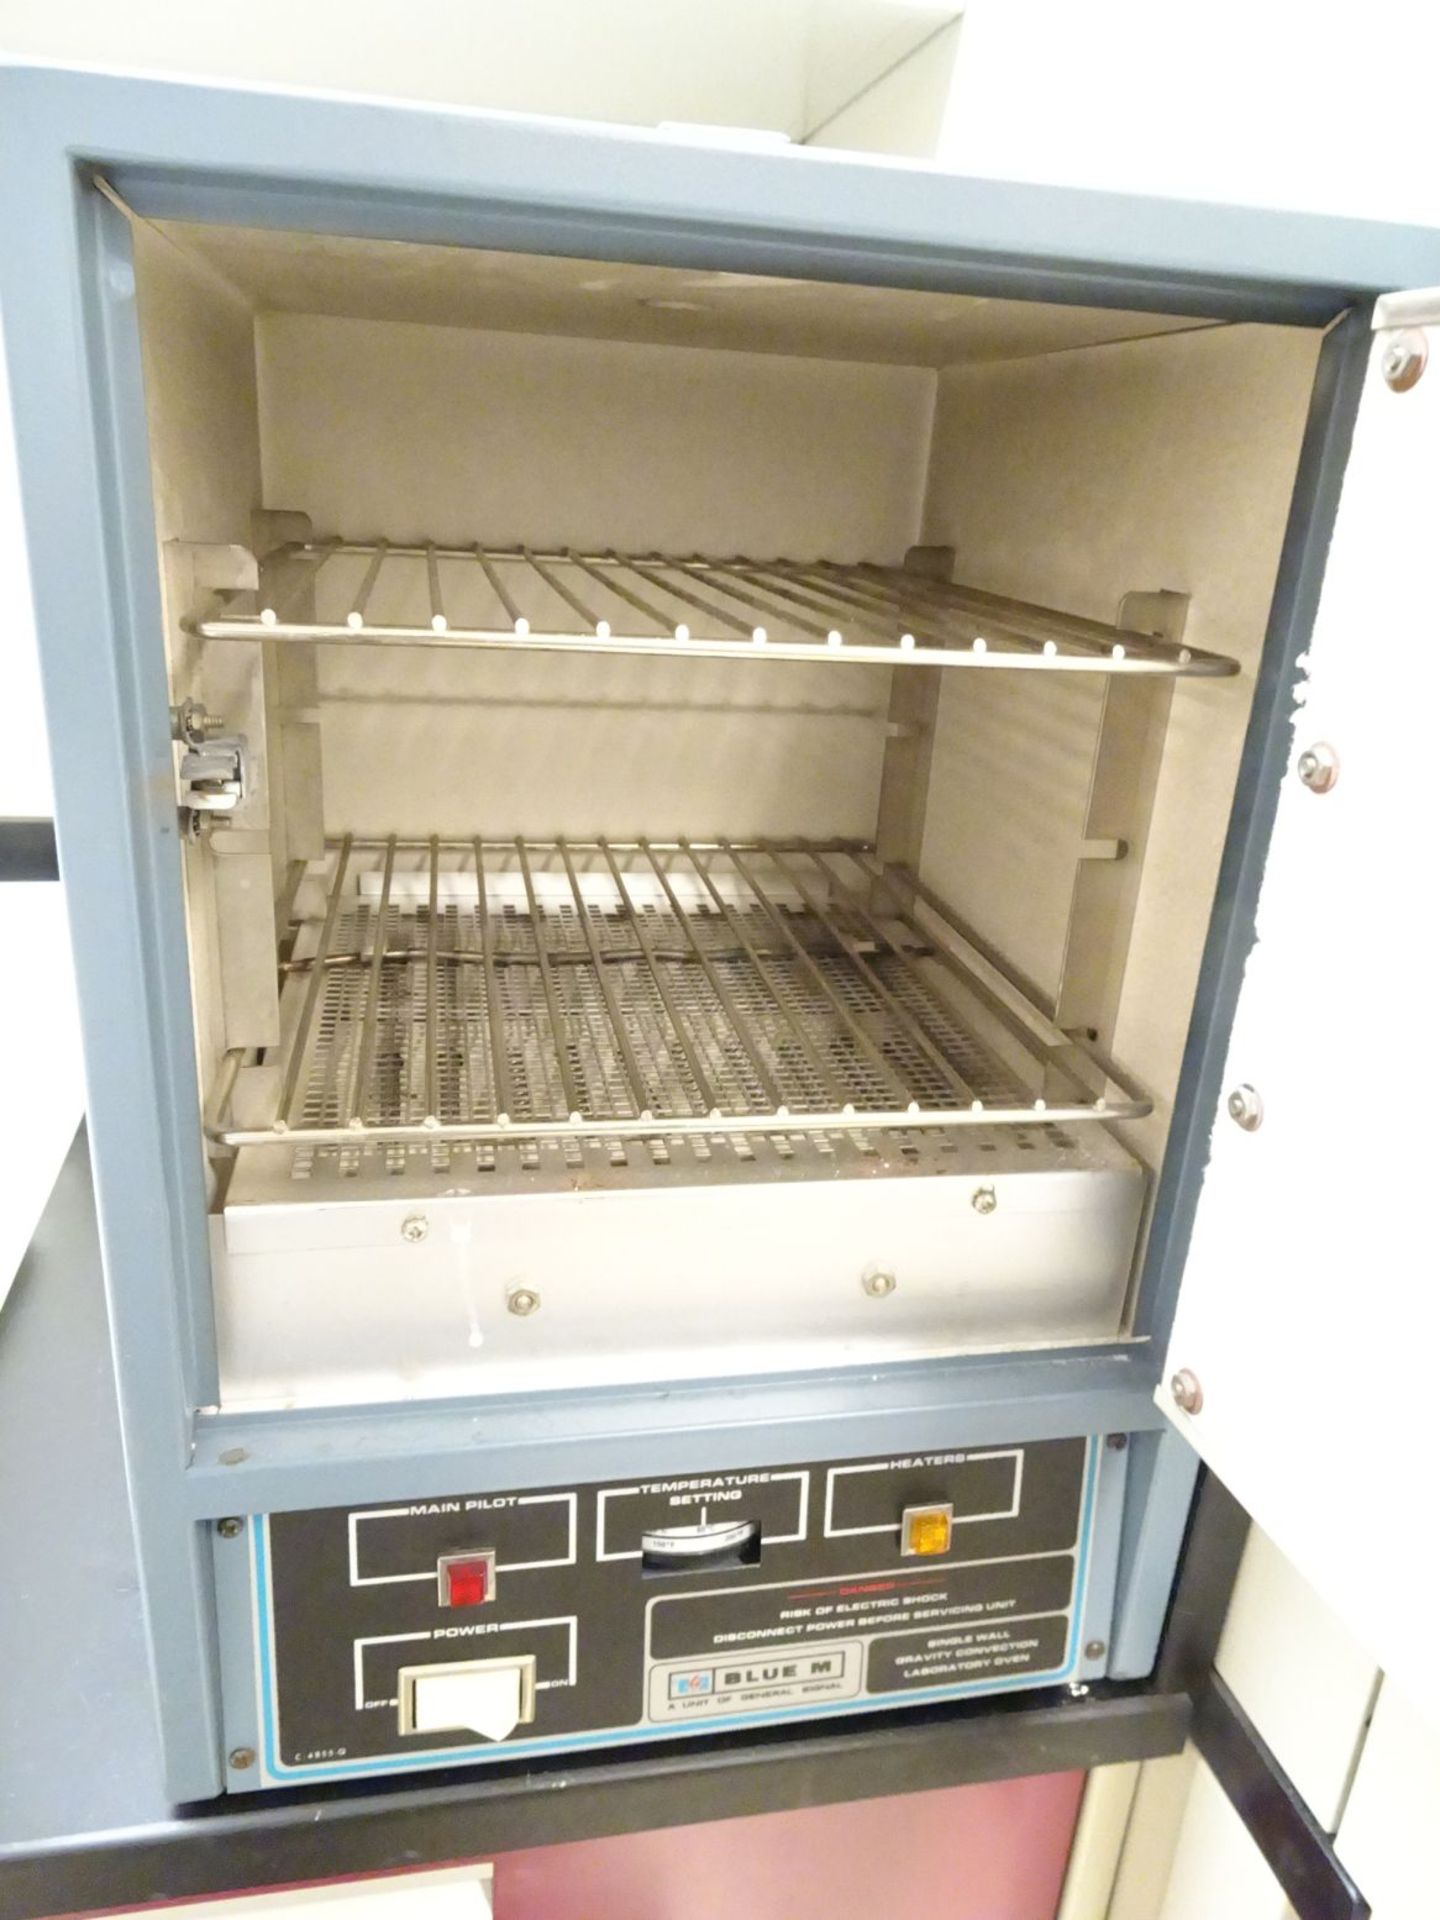 Blue M Model SW-11TA-1 Gravity Convection Oven - Image 2 of 5